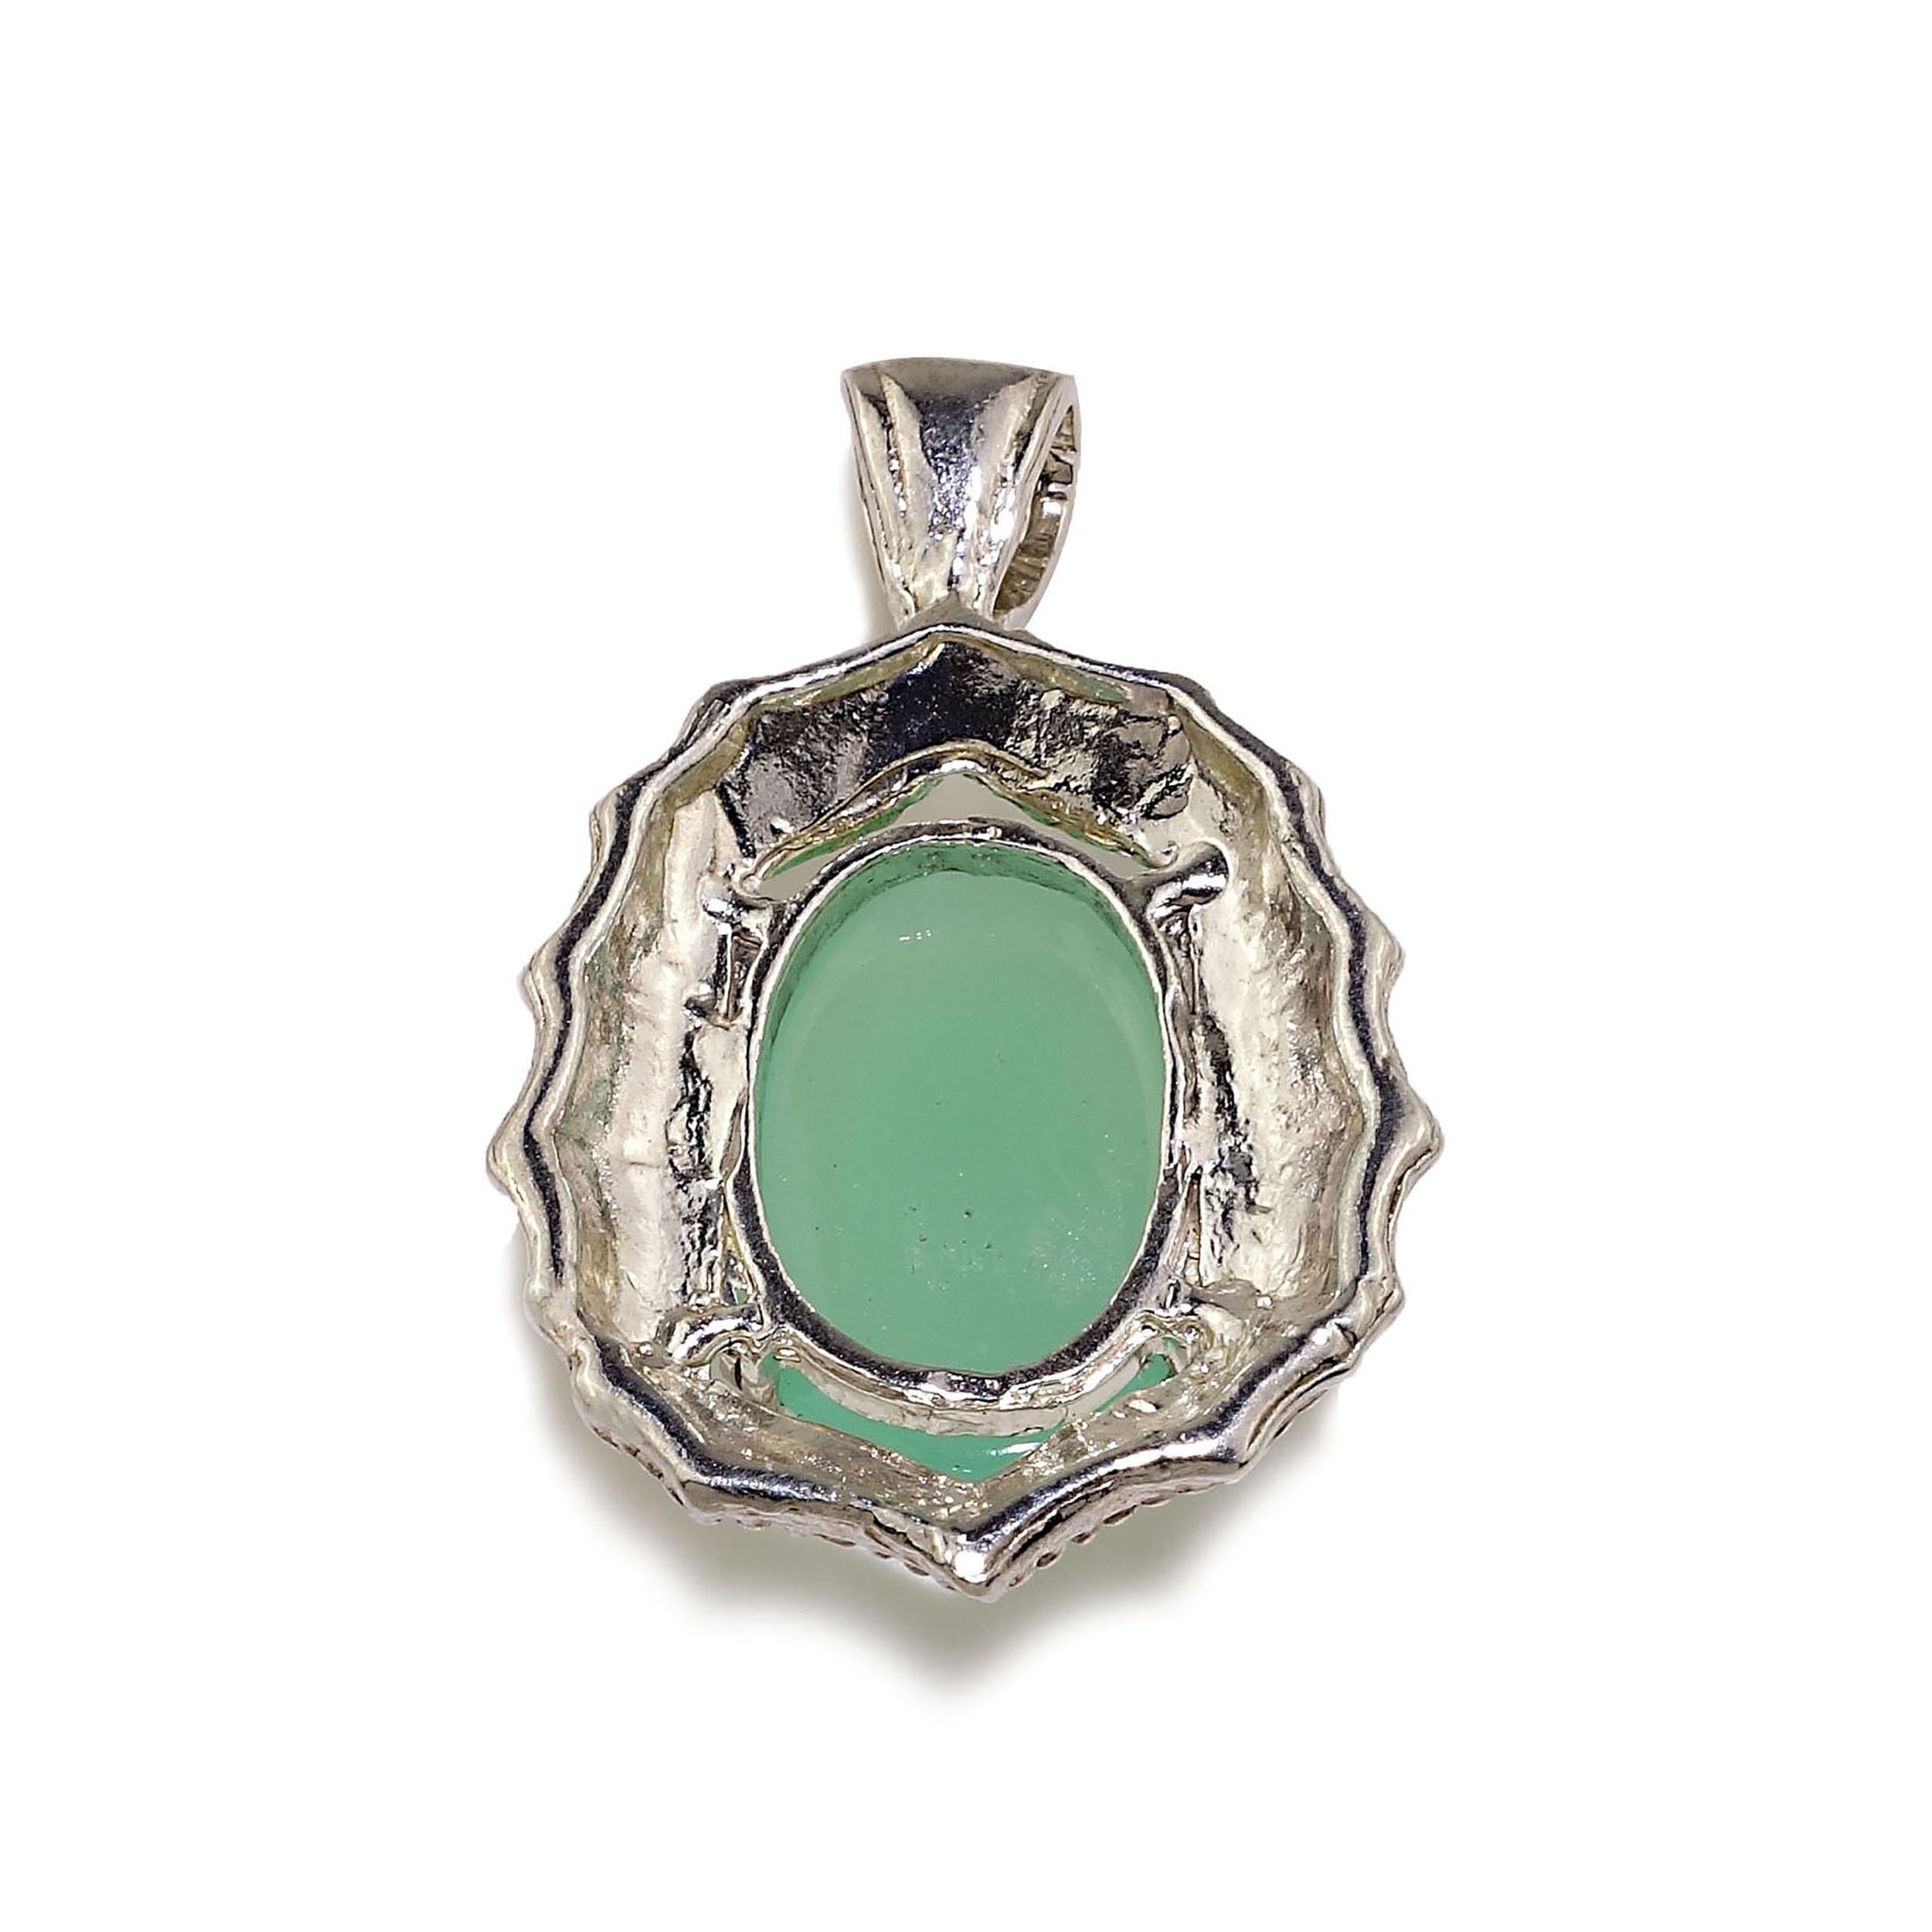 AJD Glowing Translucent Cabochon Chrysophrase in Sterling Silver Pendant In New Condition For Sale In Raleigh, NC